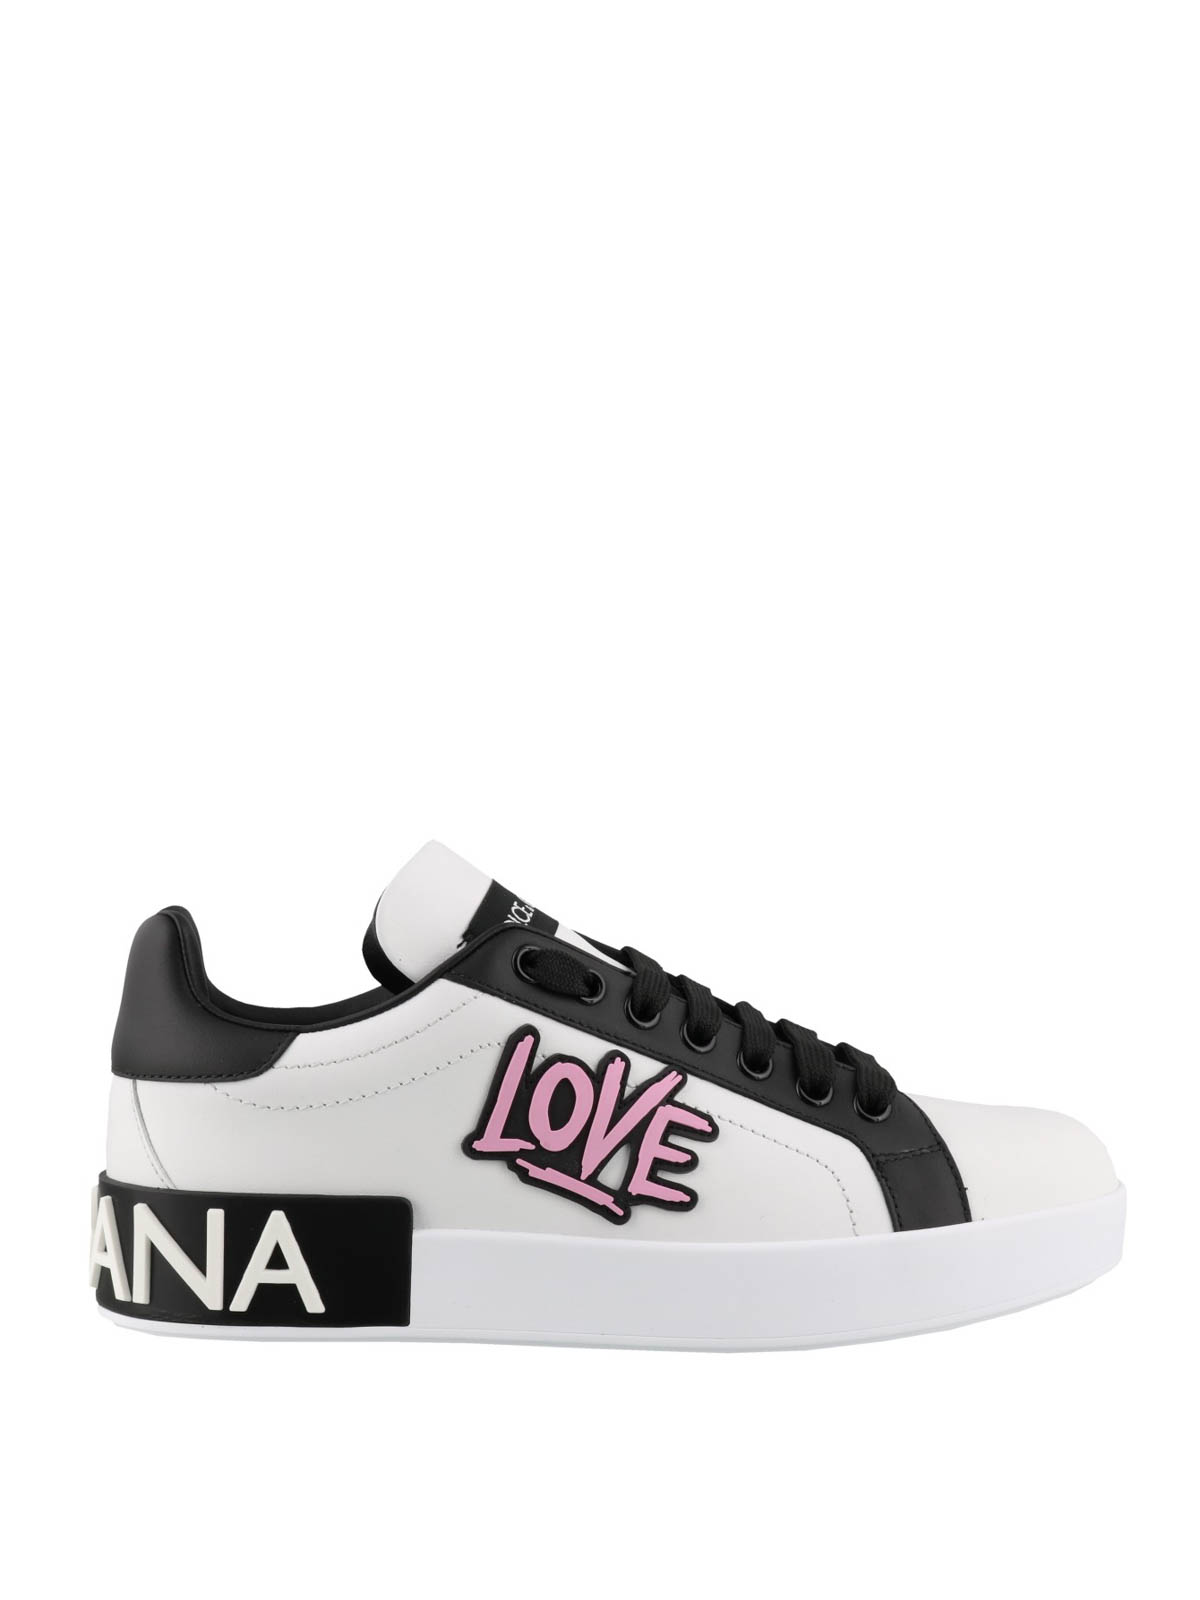 dolce and gabbana amore sneakers